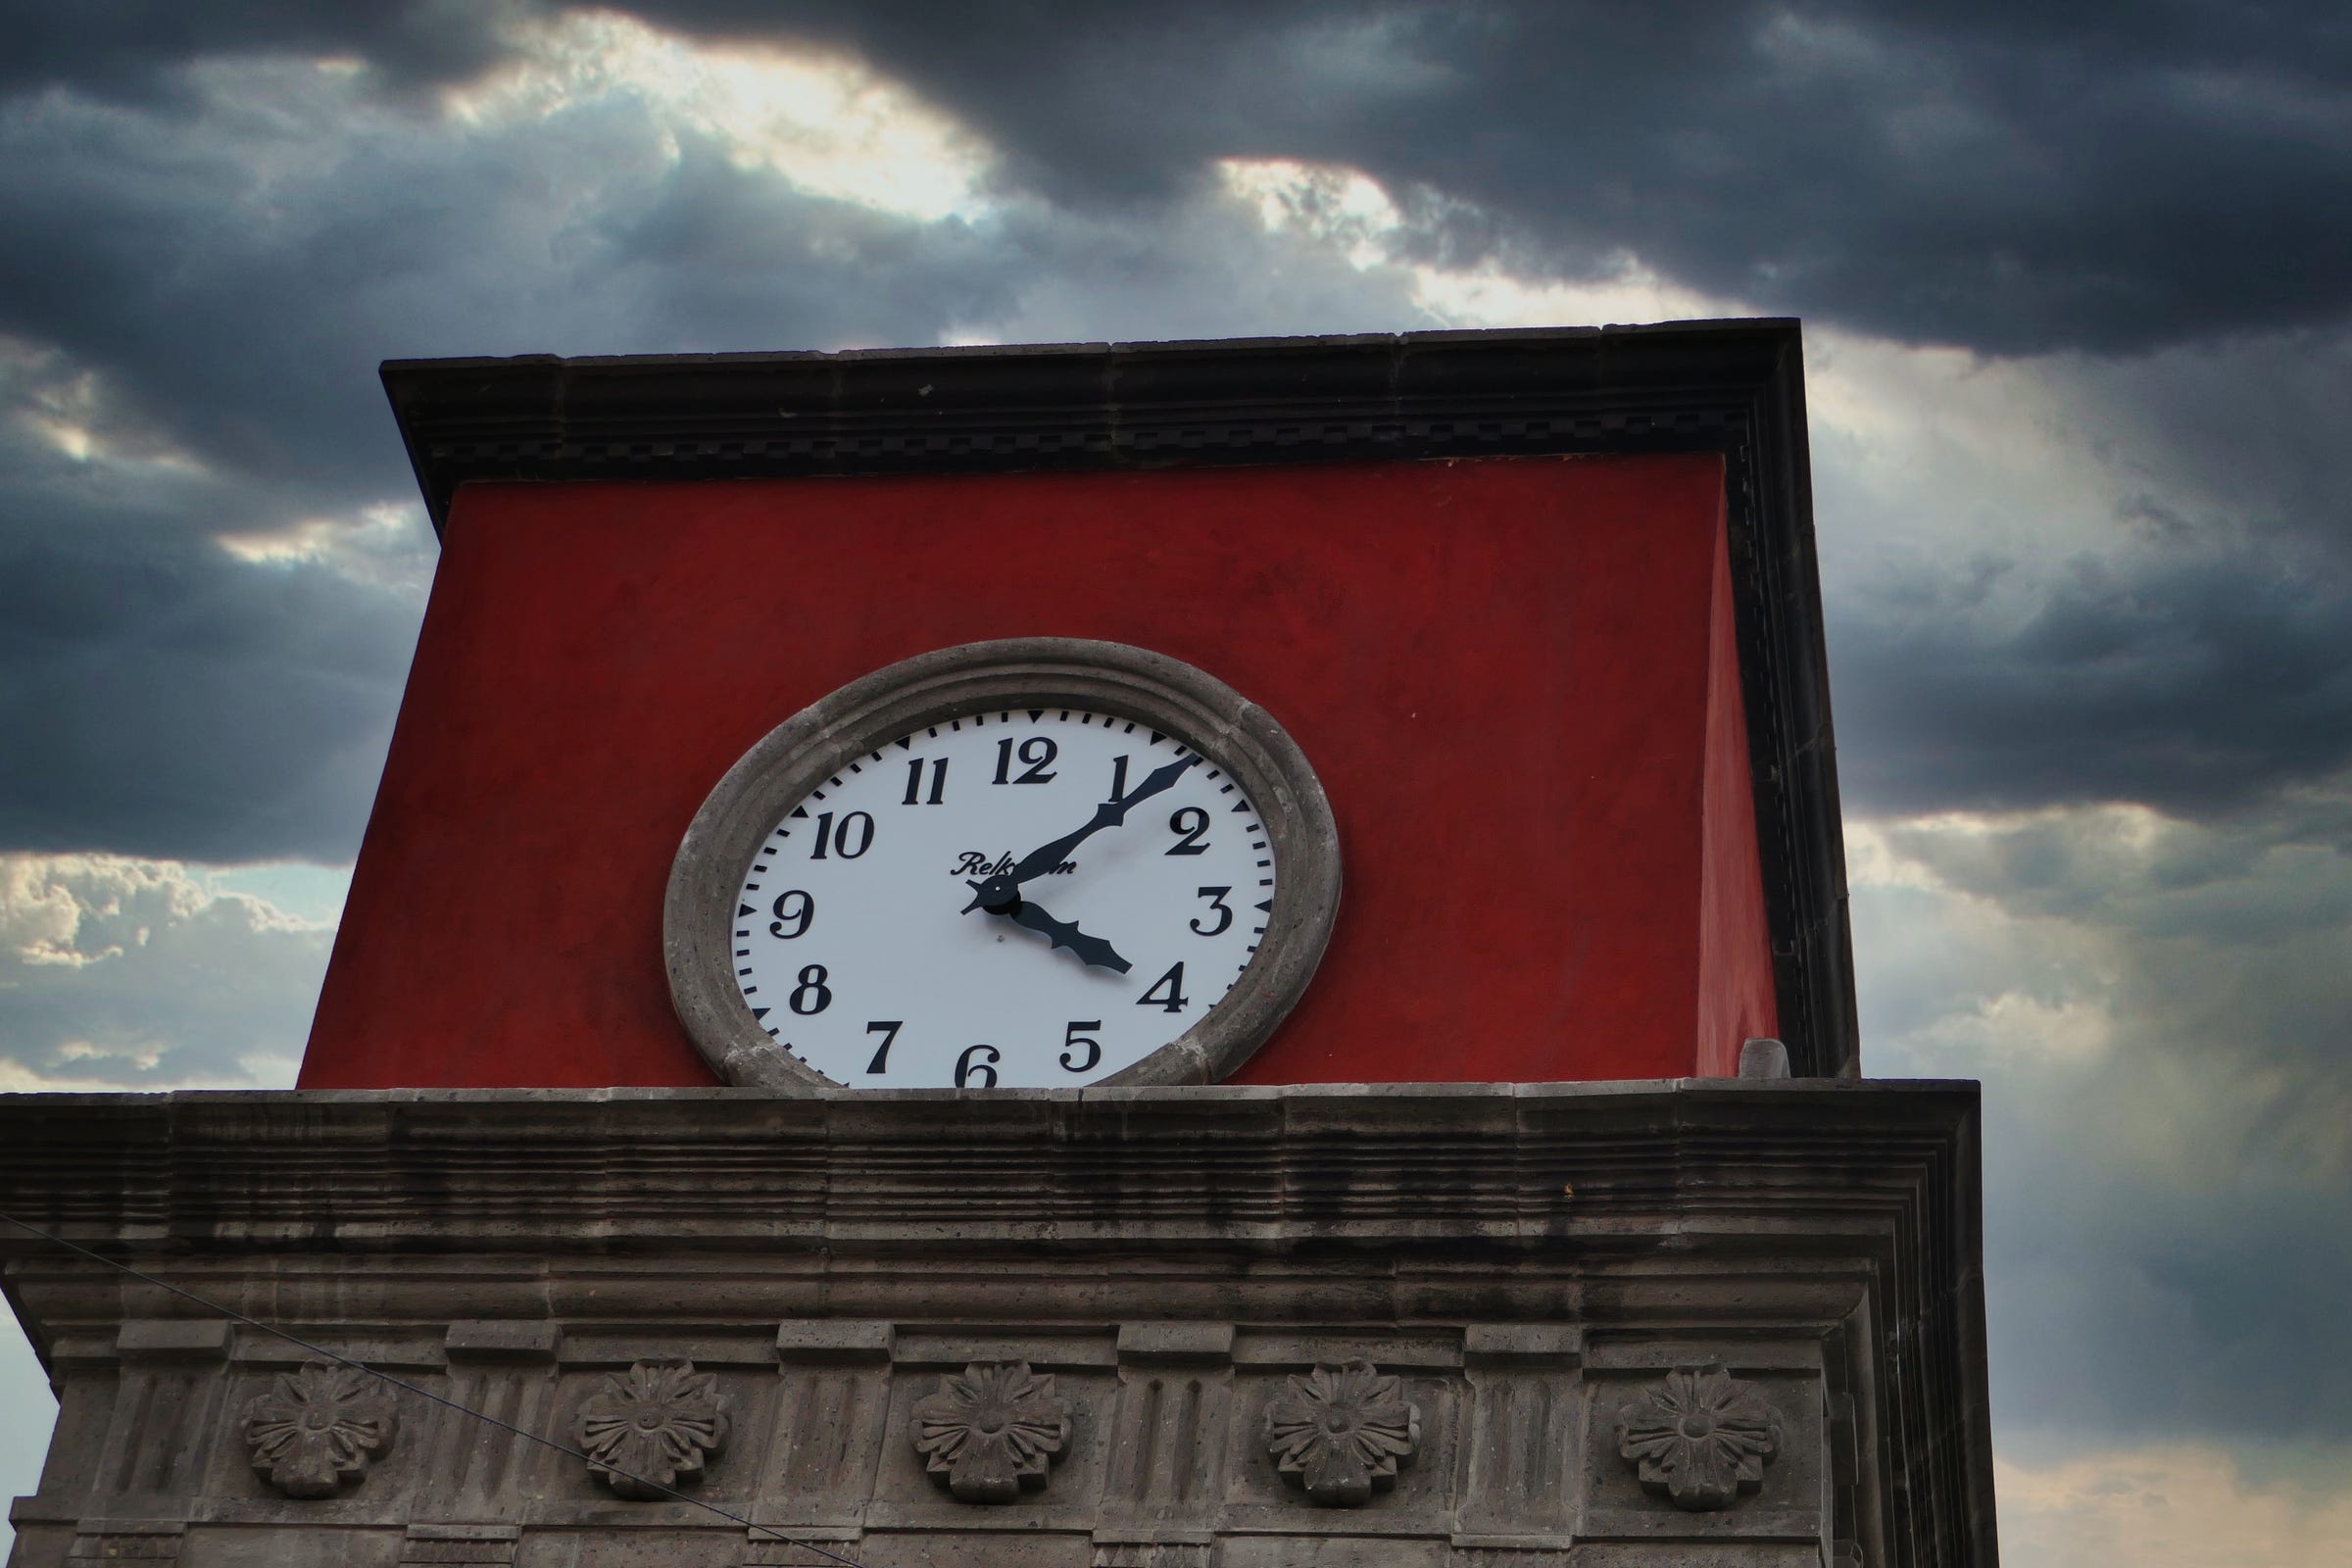 A clock frozen at 4:07 p.m on a red steeple with dark stormy clouds behind it